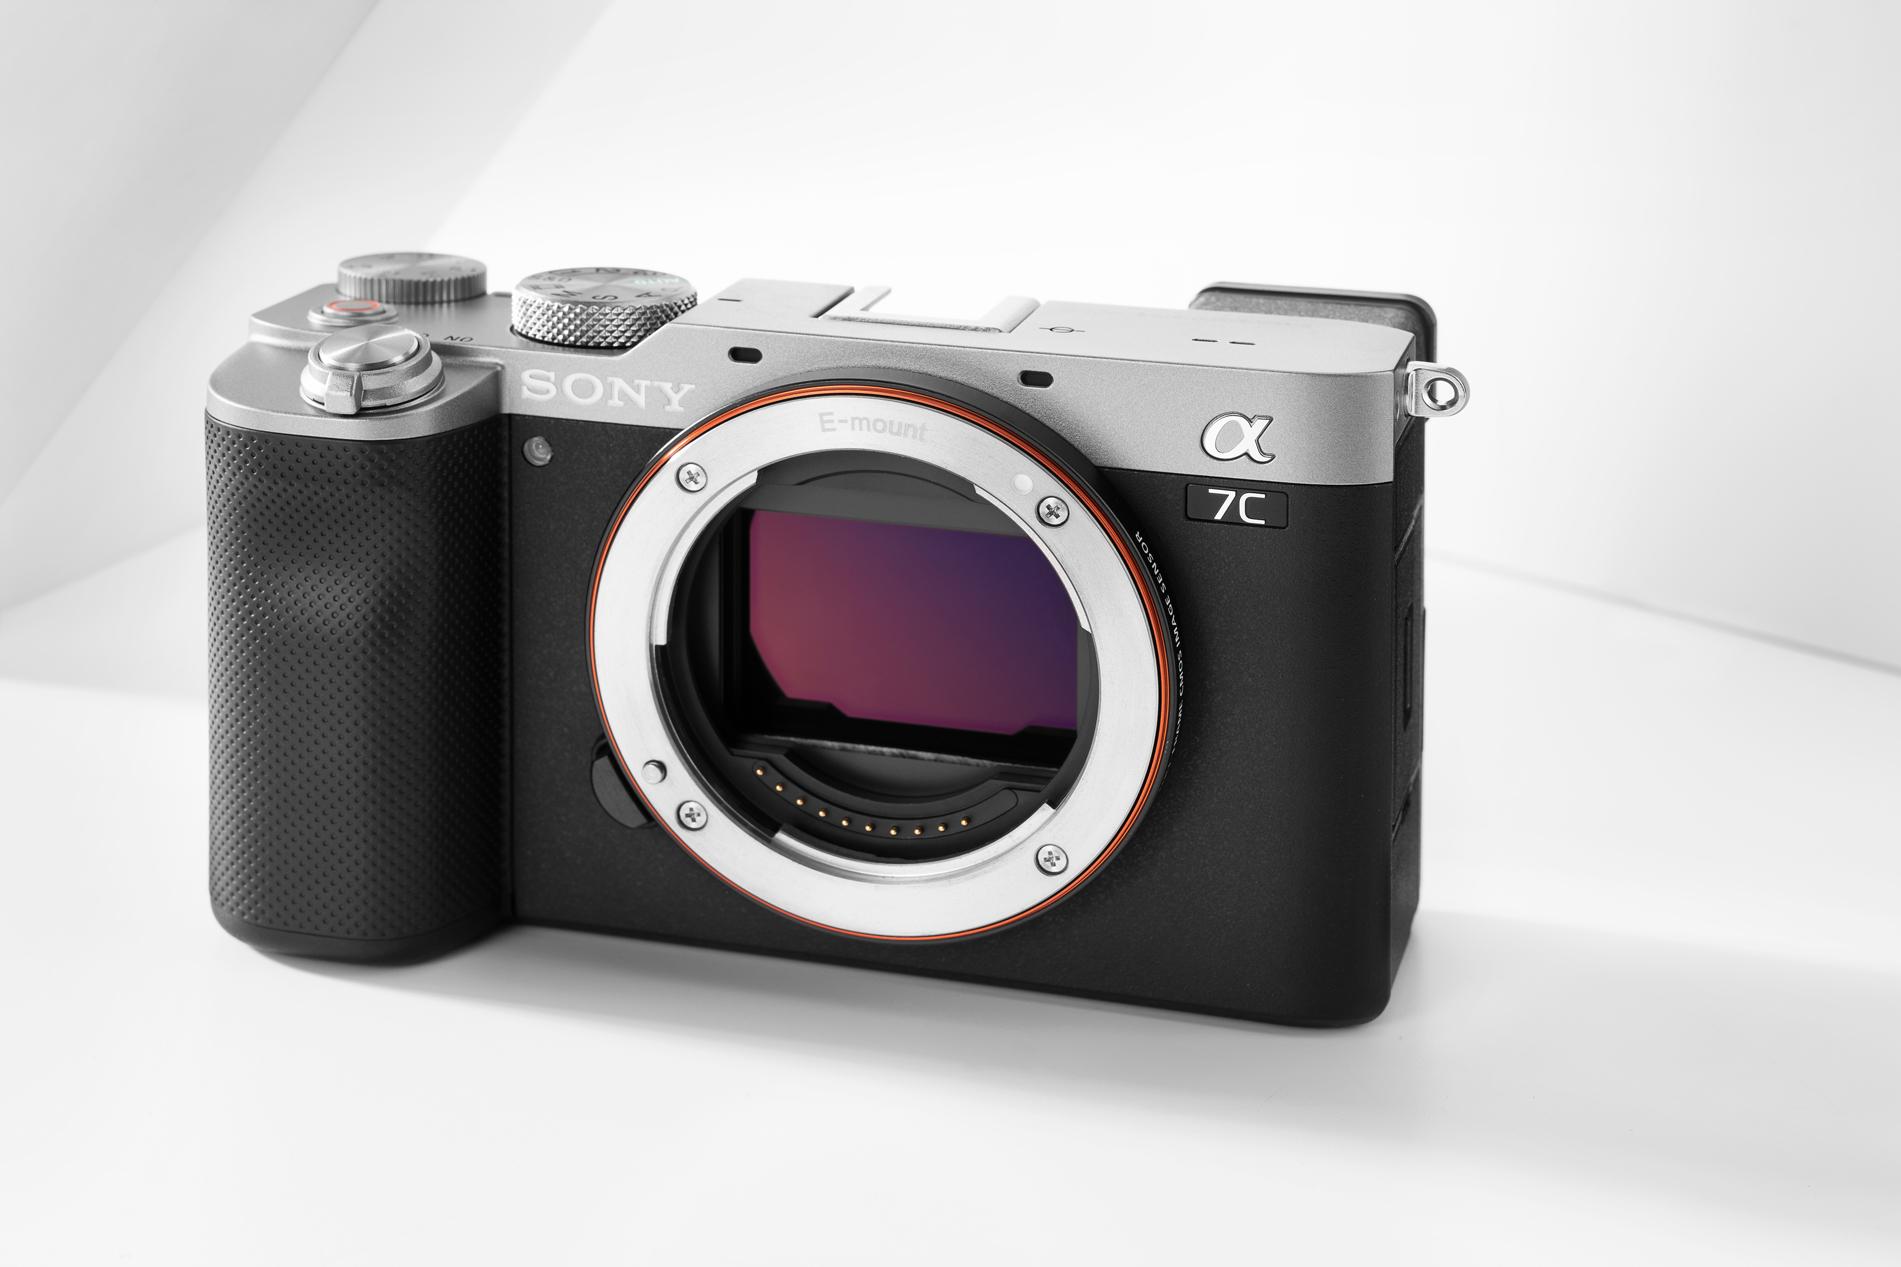 Product photography for Sony Alpha 7C product launch